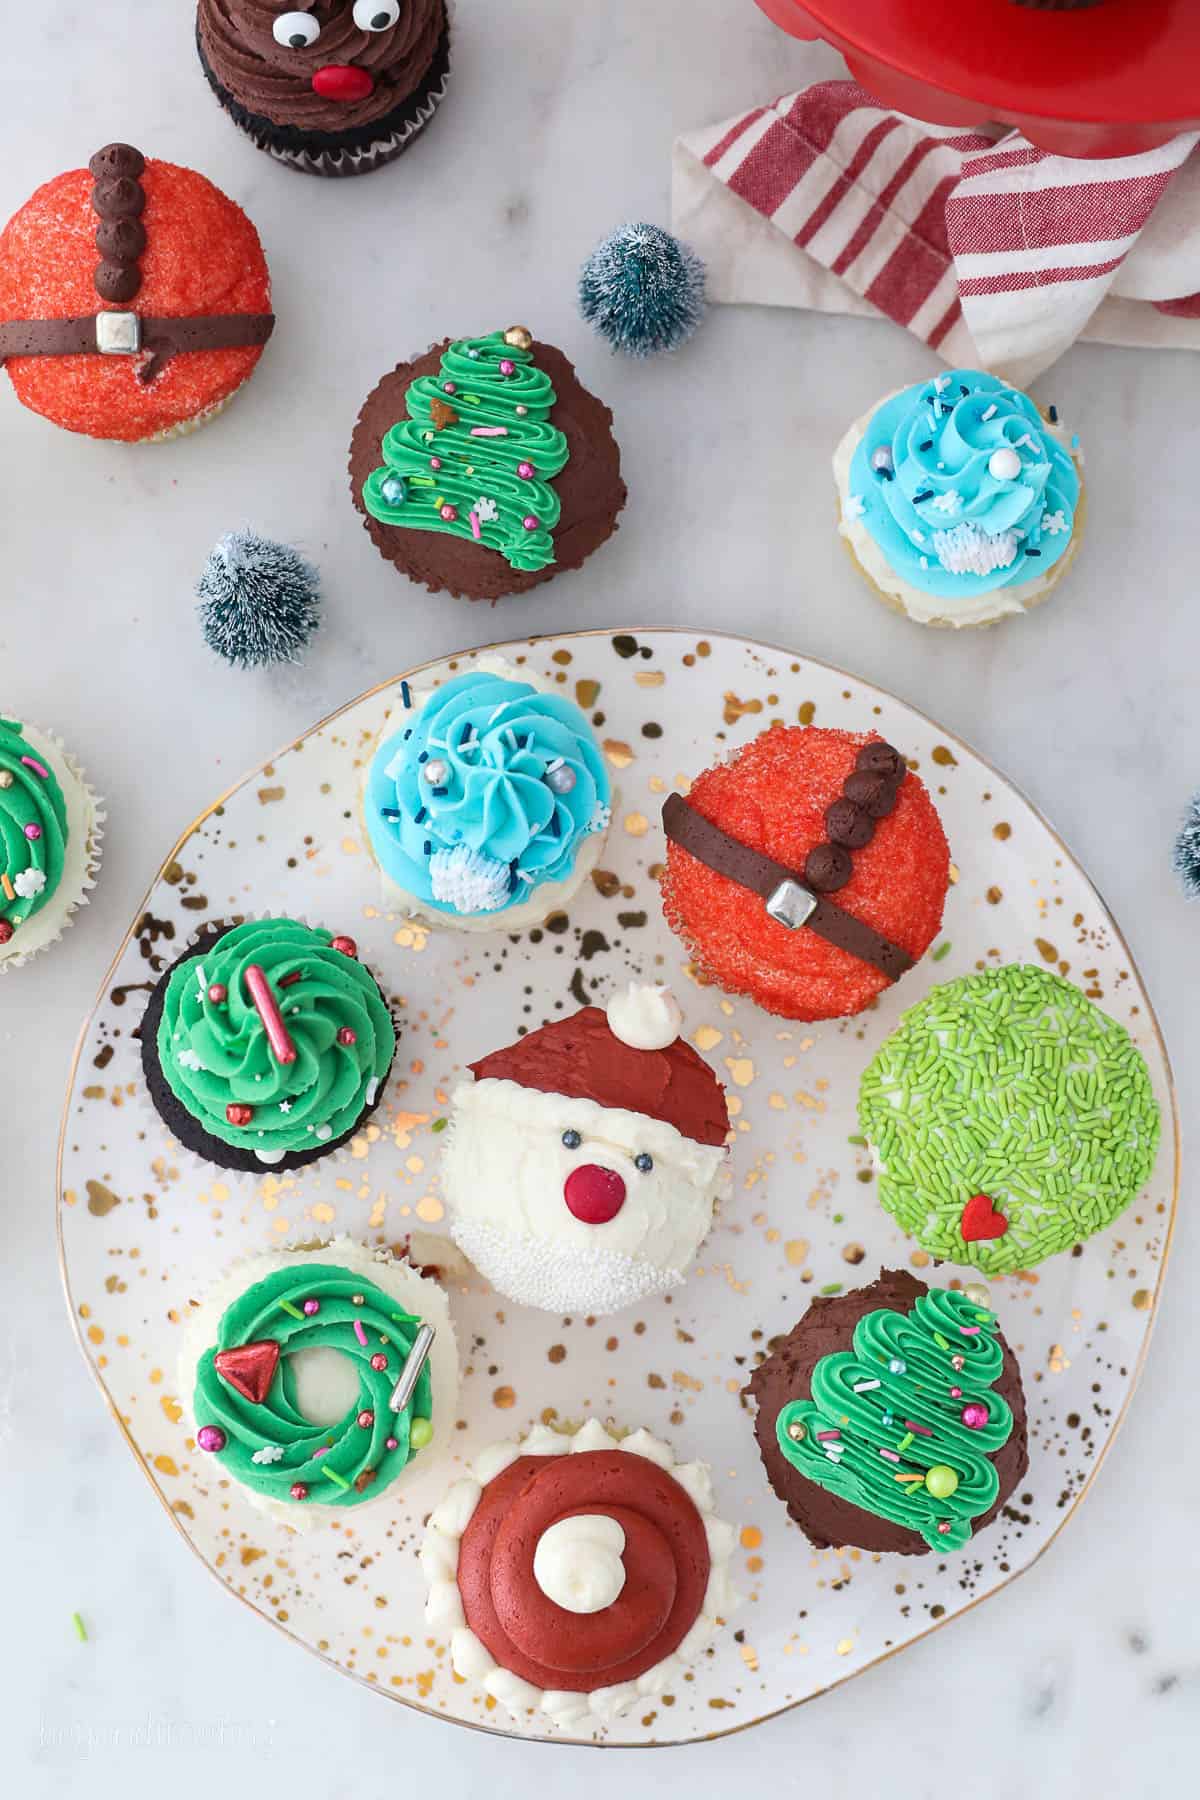 Overhead view of Assorted Christmas cupcakes decorated to look like Christmas tees, Santa, reindeer, and more.